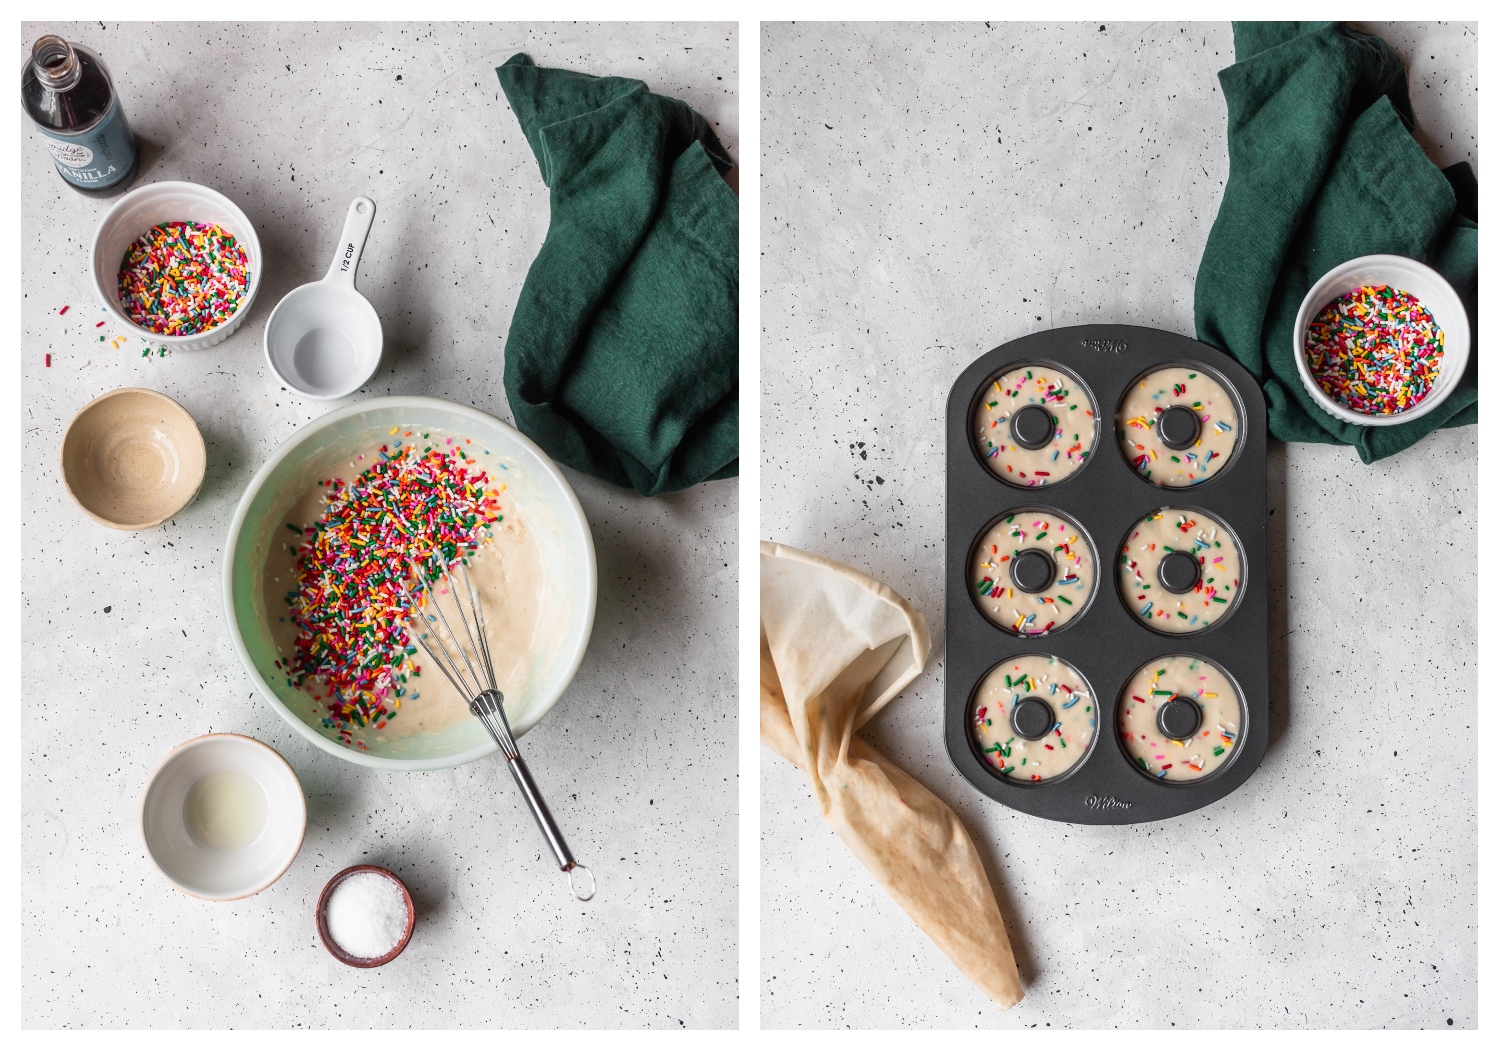 Two images taken at a bird's eye angle. On the left, sprinkles are being mixed into a bowl of cake batter sitting on a grey and white table surrounded by baking tools. On the right, a donut pan is being filled with the batter.